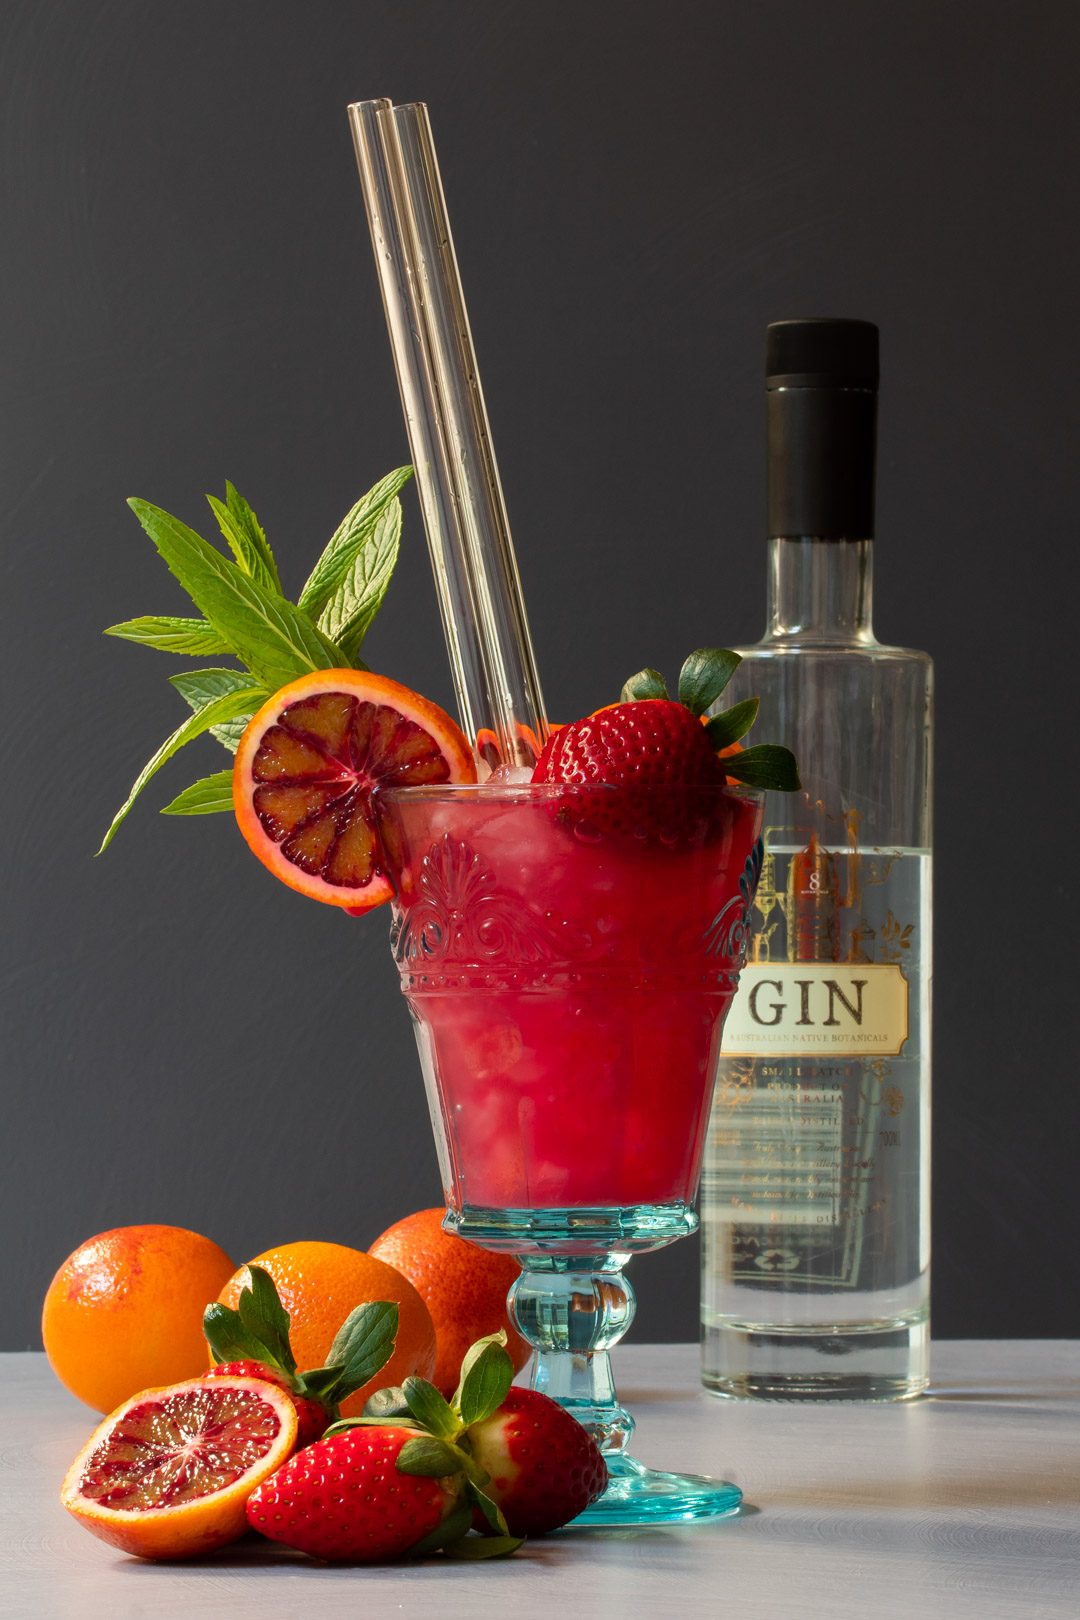 blood orange pomegranate gin daisy cocktail with bottle in background and fruit in foreground